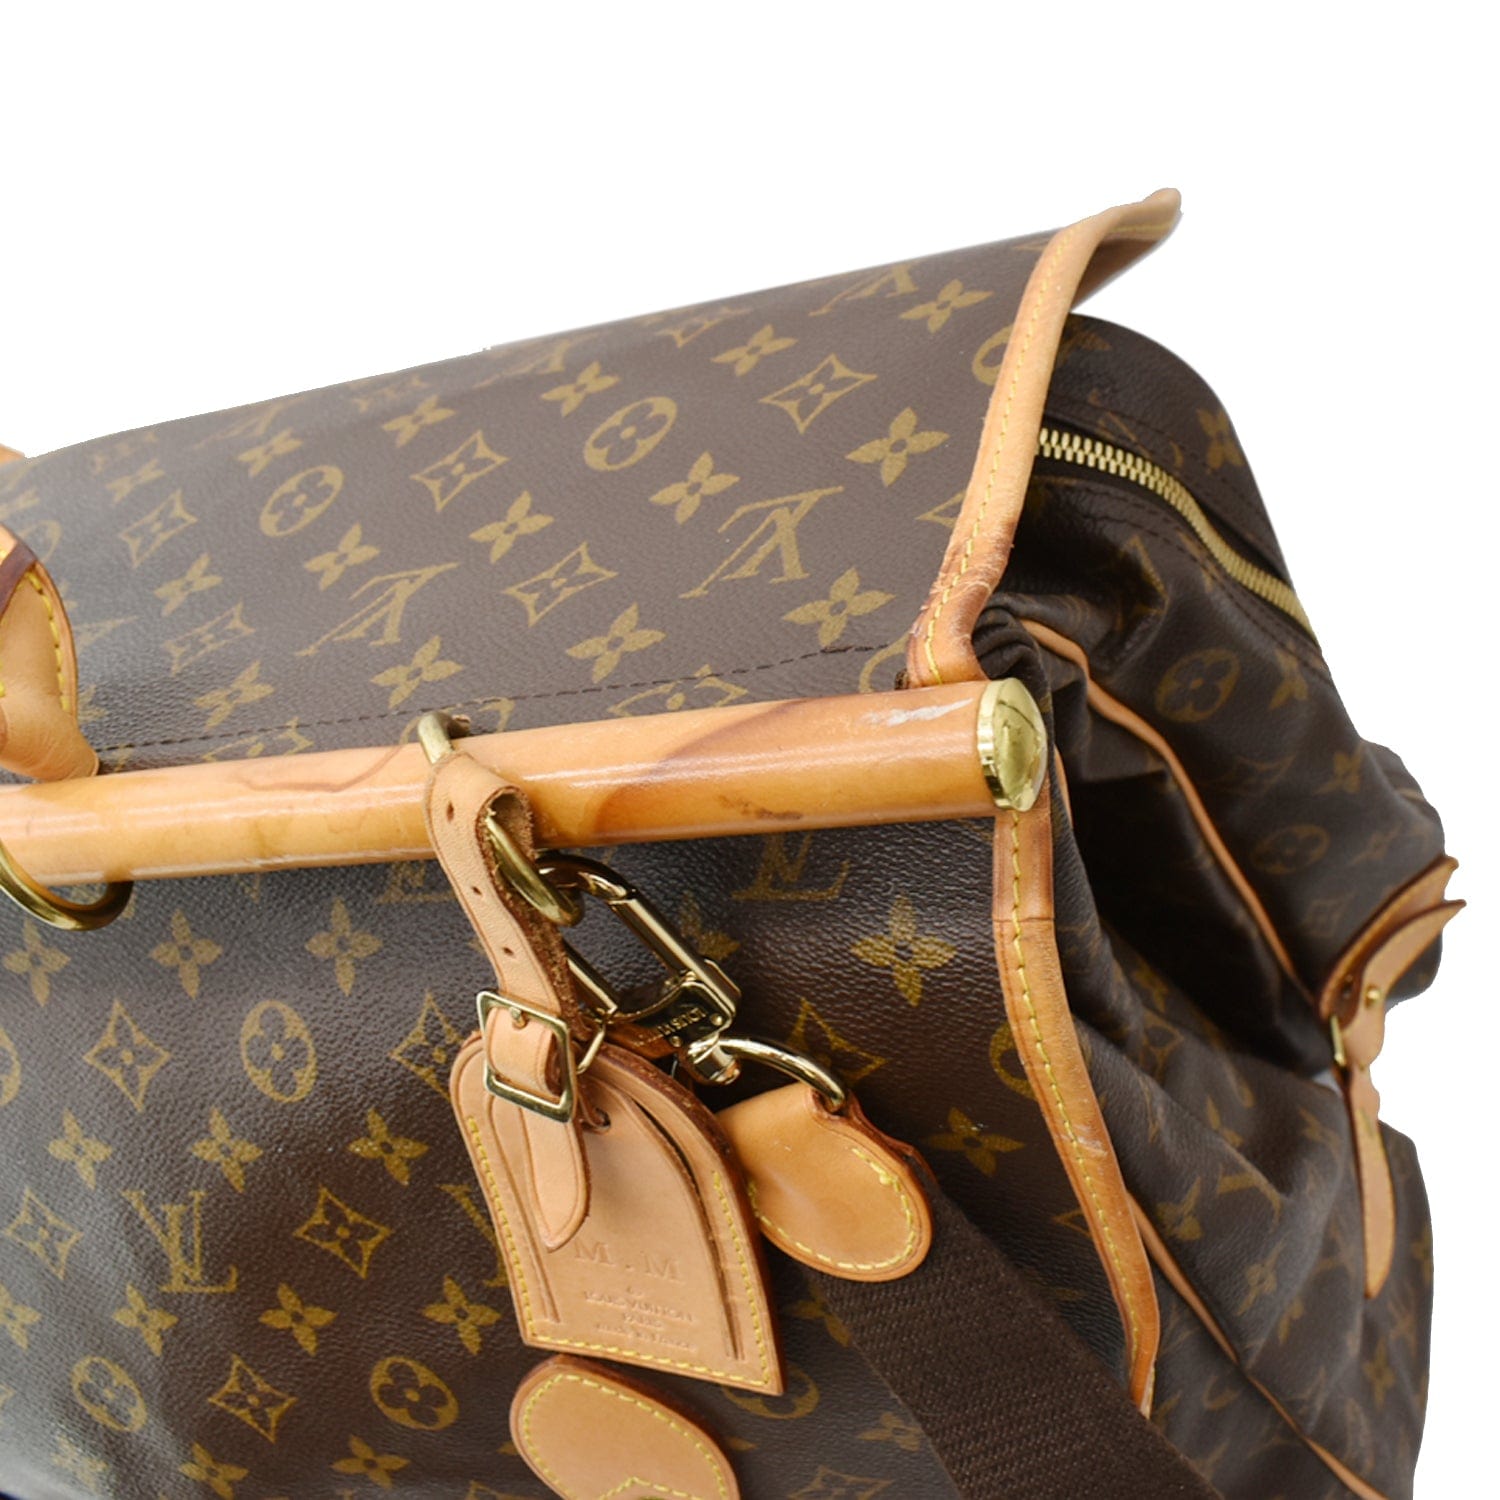 Authentic Louis Vuitton Monogram Sac Chasse Hunting 2way Travel